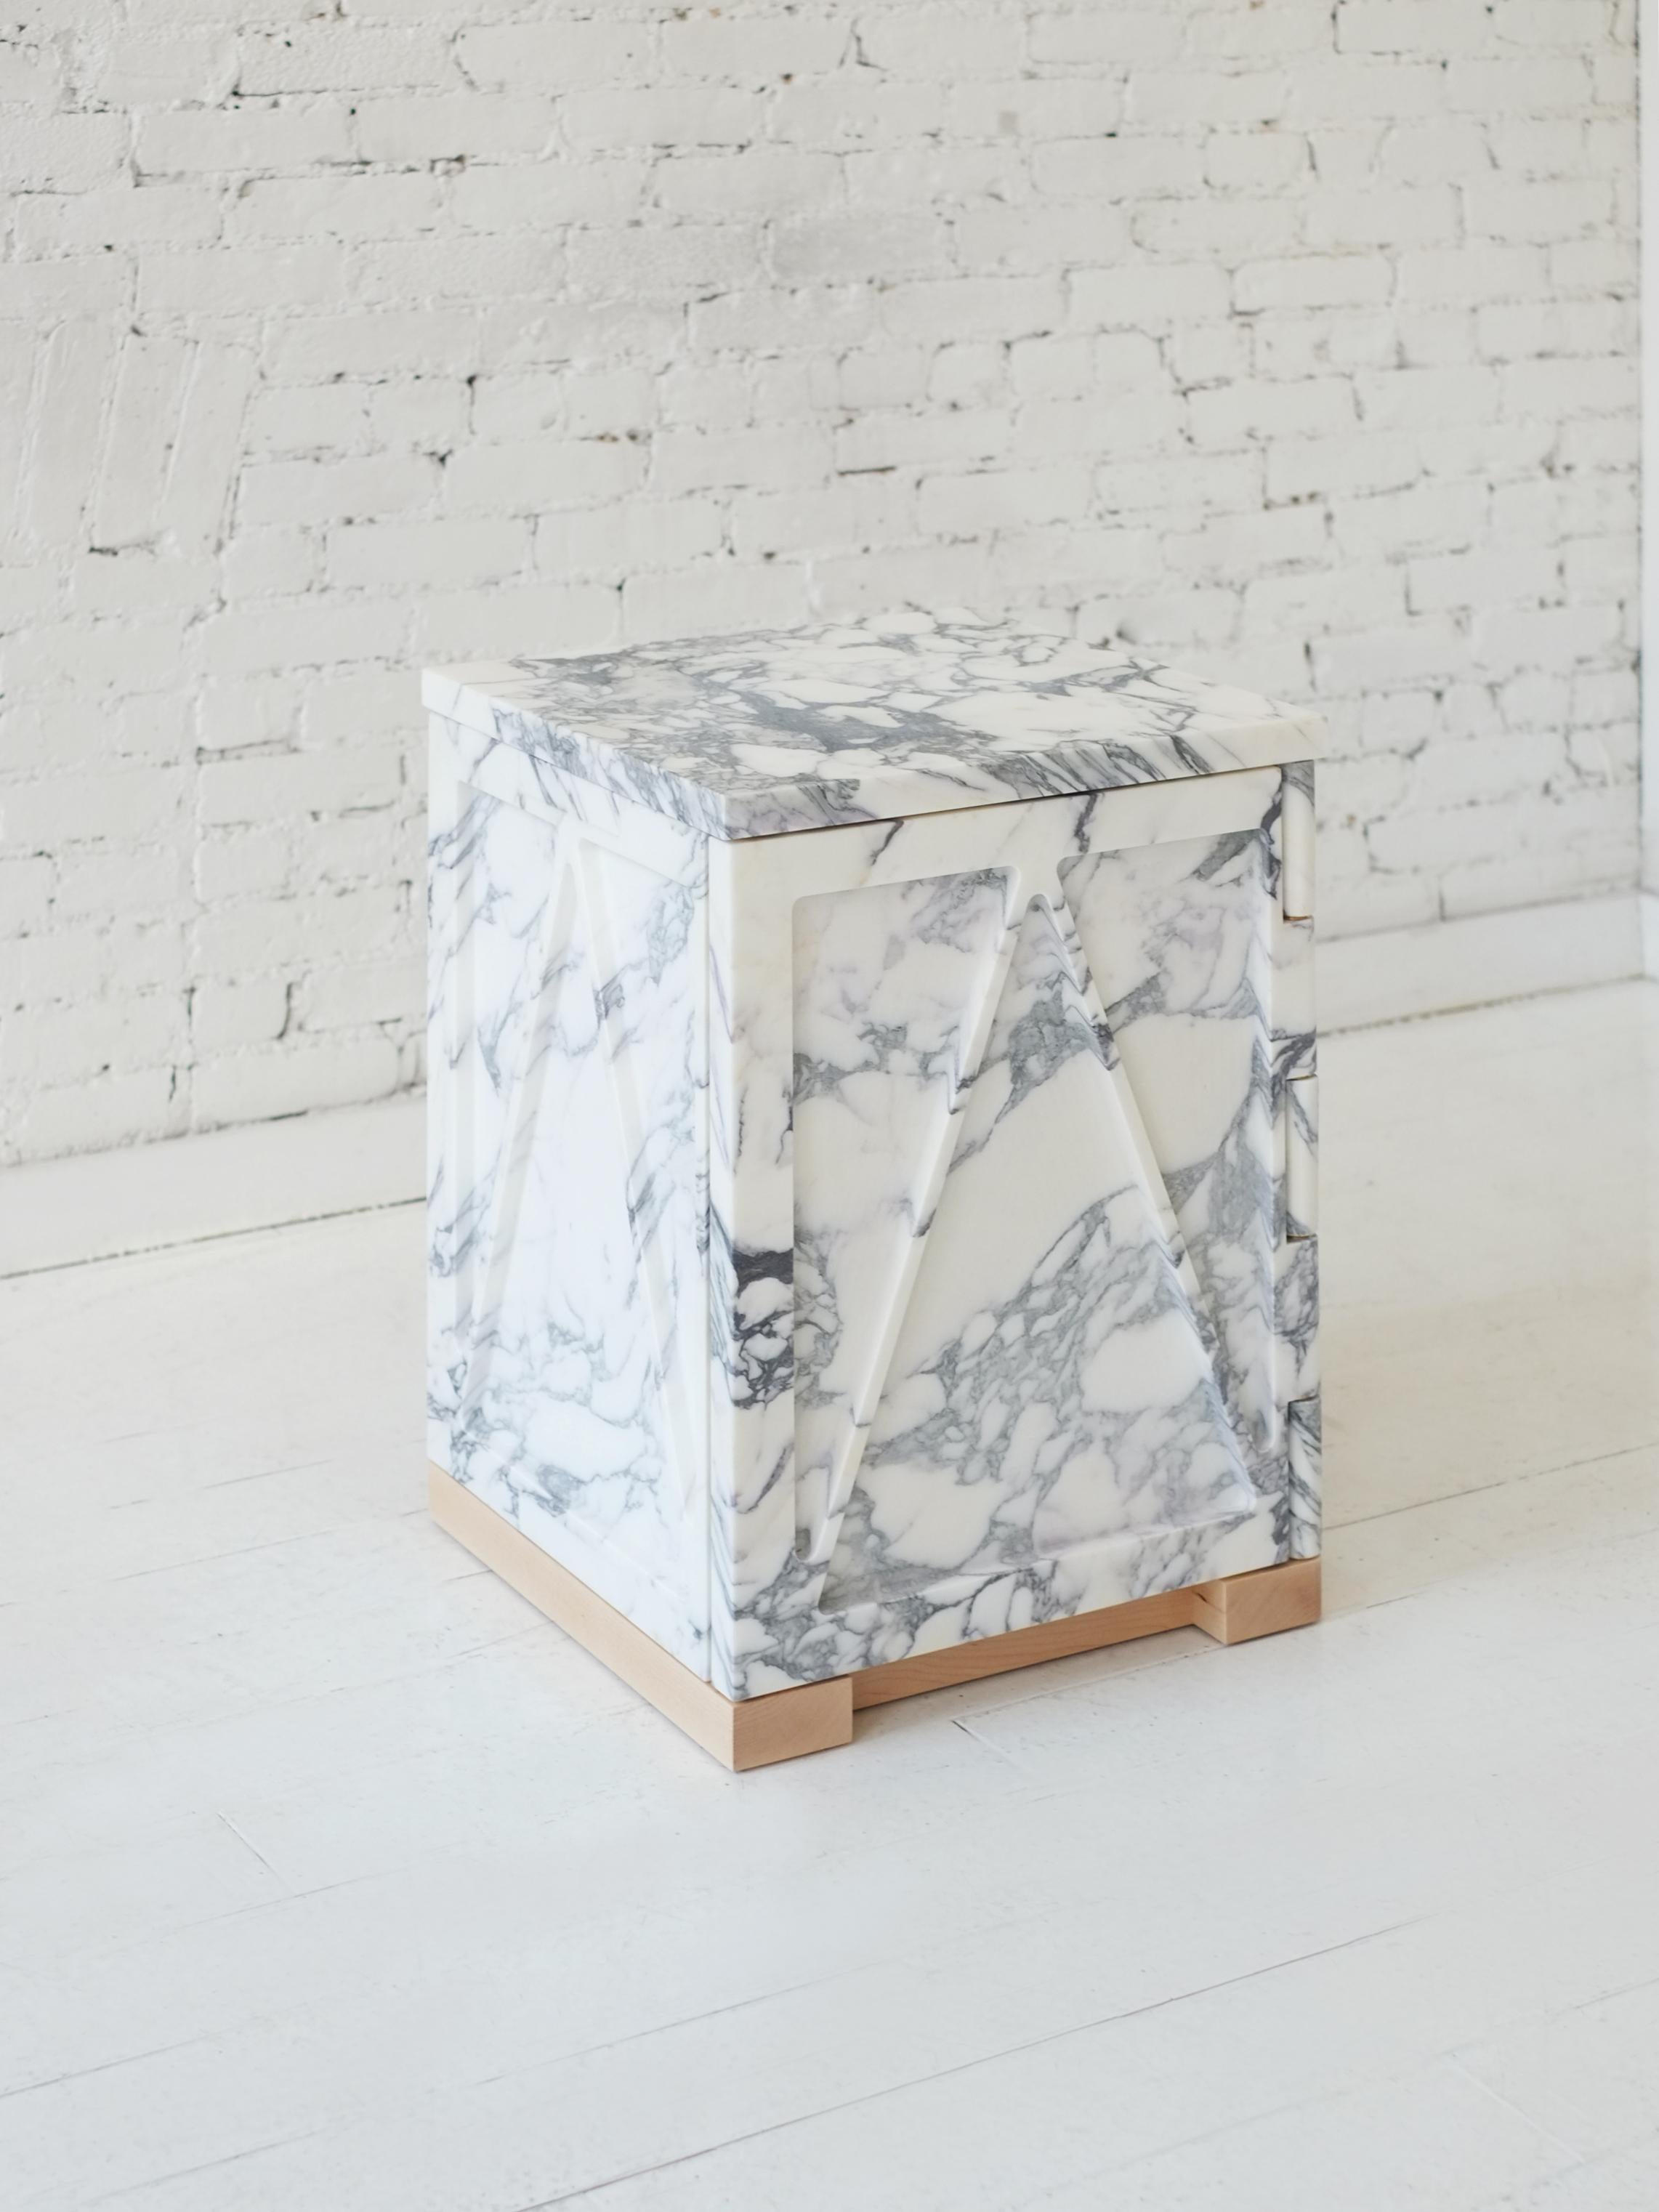 A part of Fort Standard’s collection, “Qualities of Material”, this single door stone cabinet has a triangular relief pattern milled into the exterior panels, which removes excess weight and allows the remaining ribs to retain the material’s